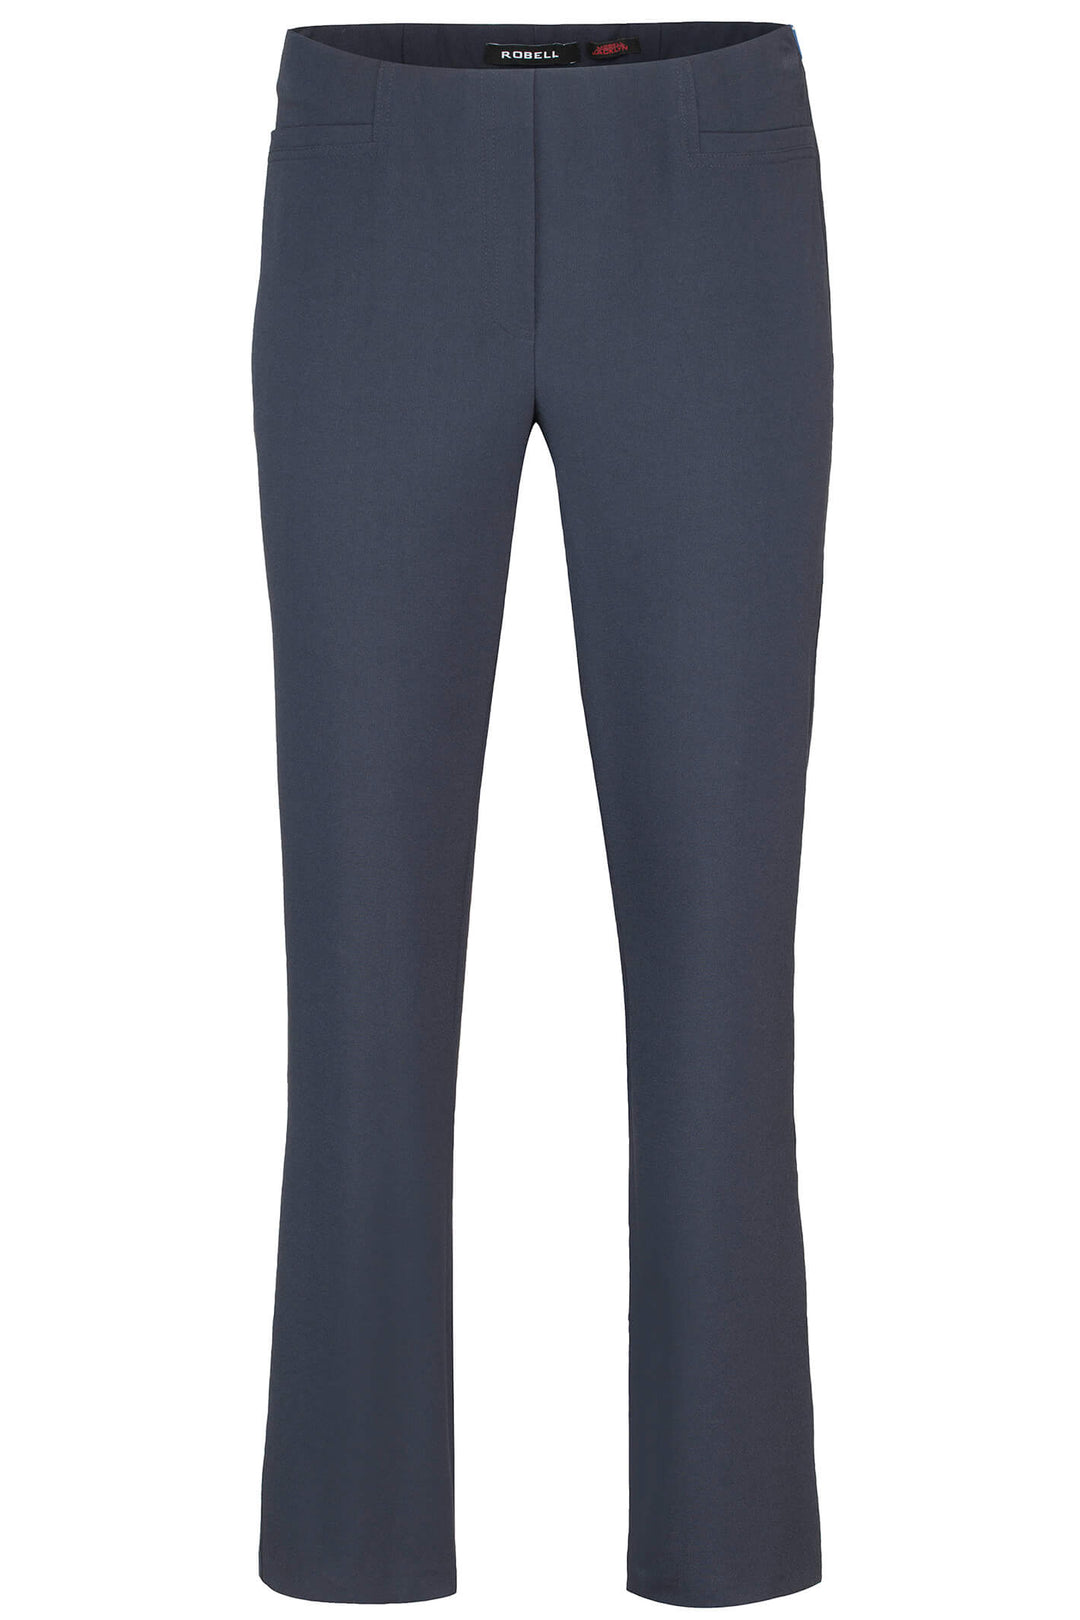 Robell 51408 69 Navy Jacklyn Woven Stretch Trousers - Experience boutique